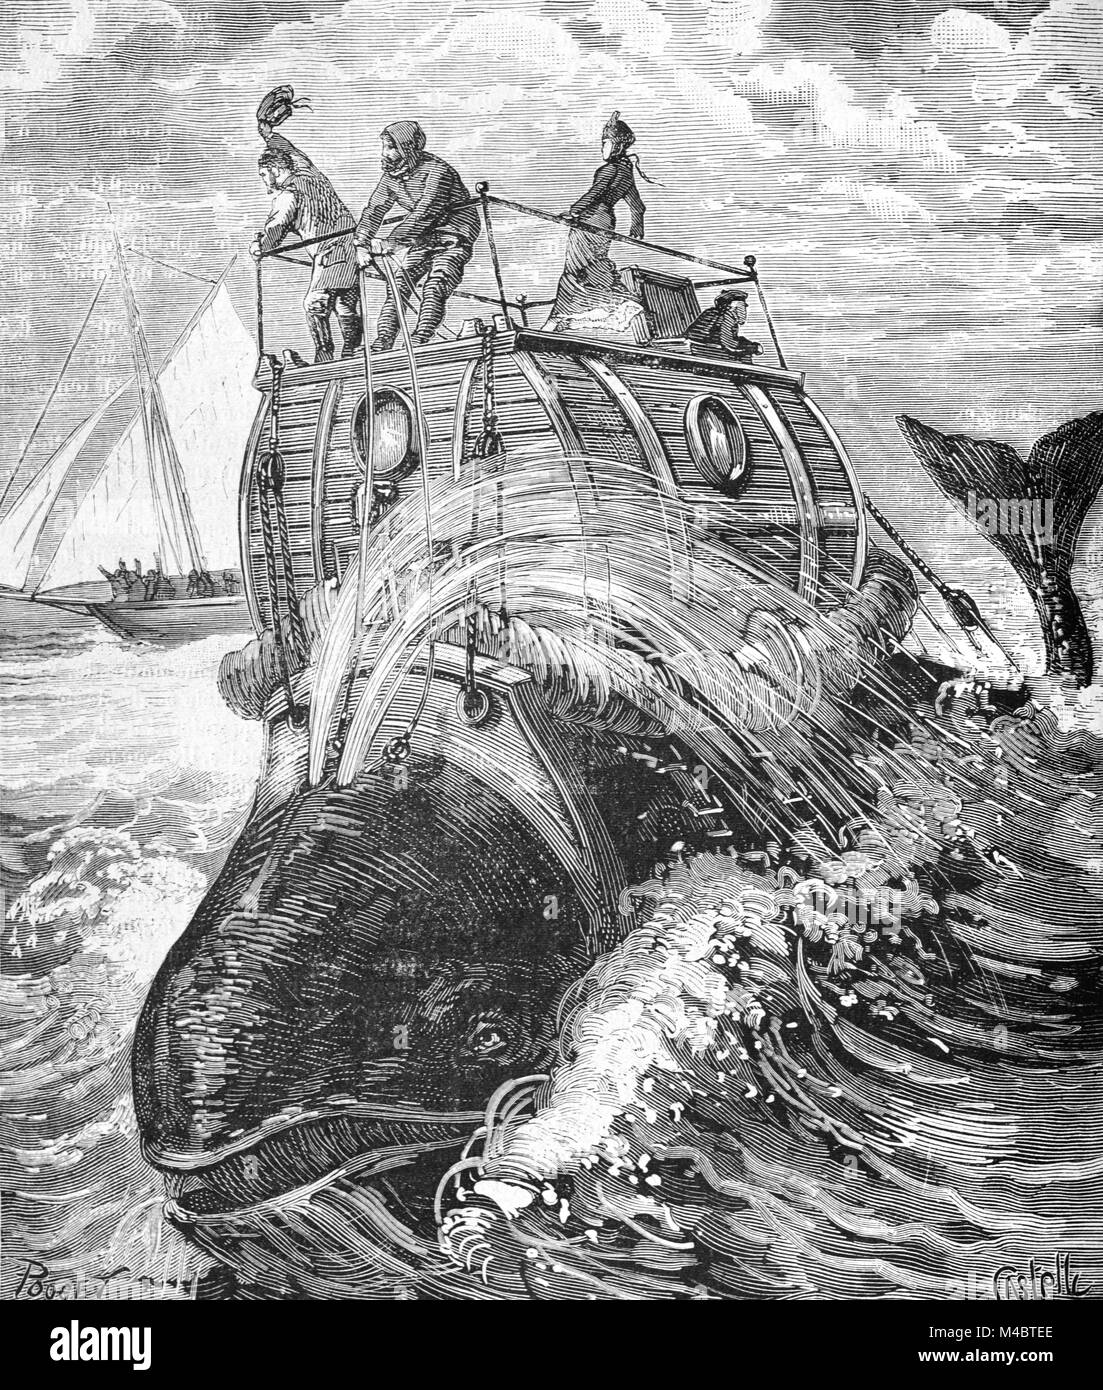 Fantastical or Fantasy Whale Boat or Whale Rigged with Giant Wooden Saddle for Whale Rides on the World's Oceans. Wacky Fantasy Vehicle for Water Transport (Engraving, 1880) Stock Photo